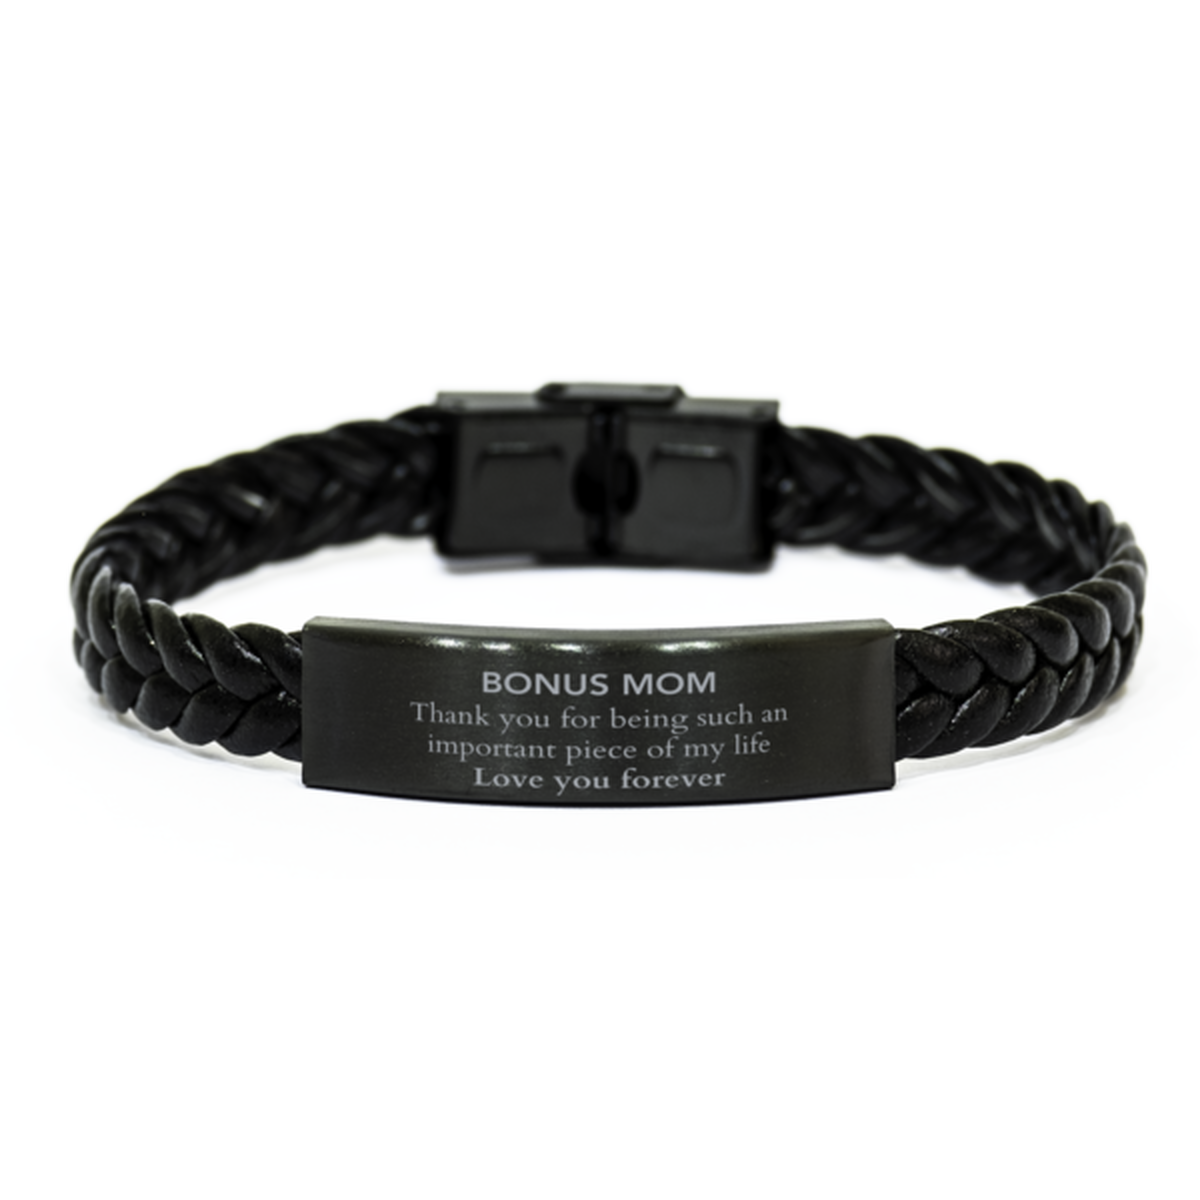 Appropriate Bonus Mom Braided Leather Bracelet Epic Birthday Gifts for Bonus Mom Thank you for being such an important piece of my life Bonus Mom Christmas Mothers Fathers Day